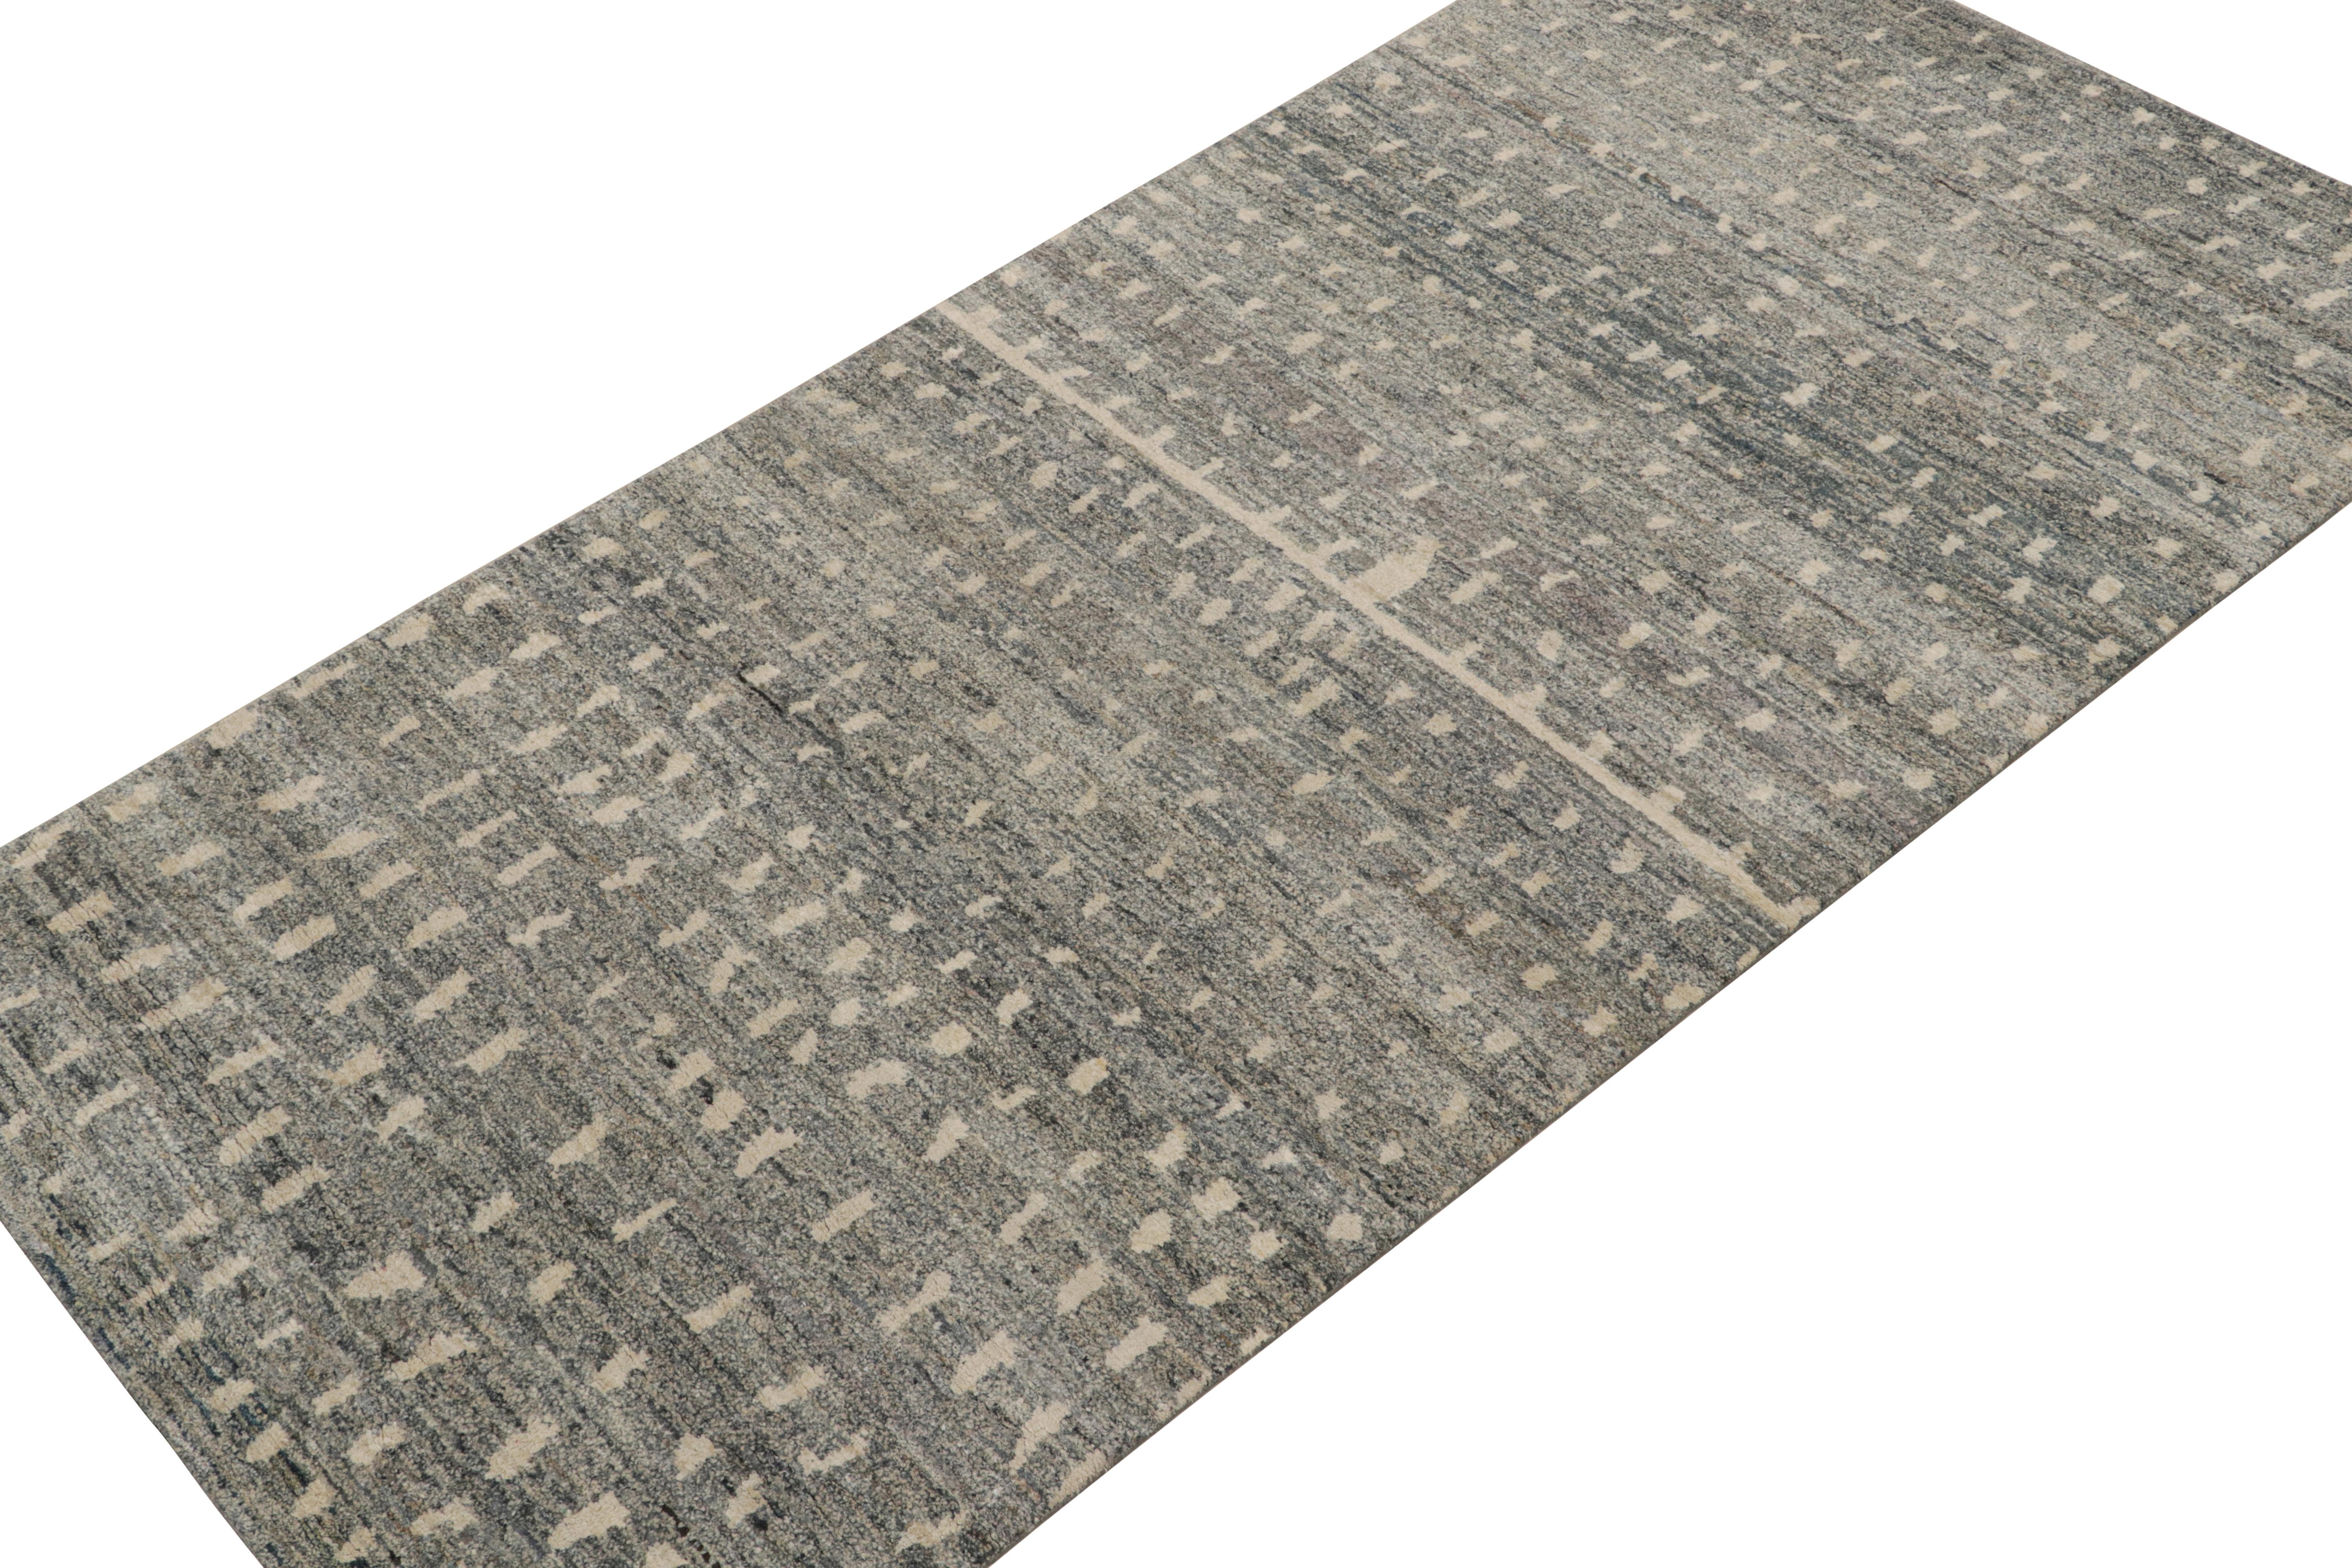 Hand-knotted in silk and cotton, this 4x6 modern rug is from the Moroccan rug collection by Rug & Kilim. 

On the Design: 

Our Moroccans represent a new take on primitivist Berber styles with archaic patterns in a more durable high-end